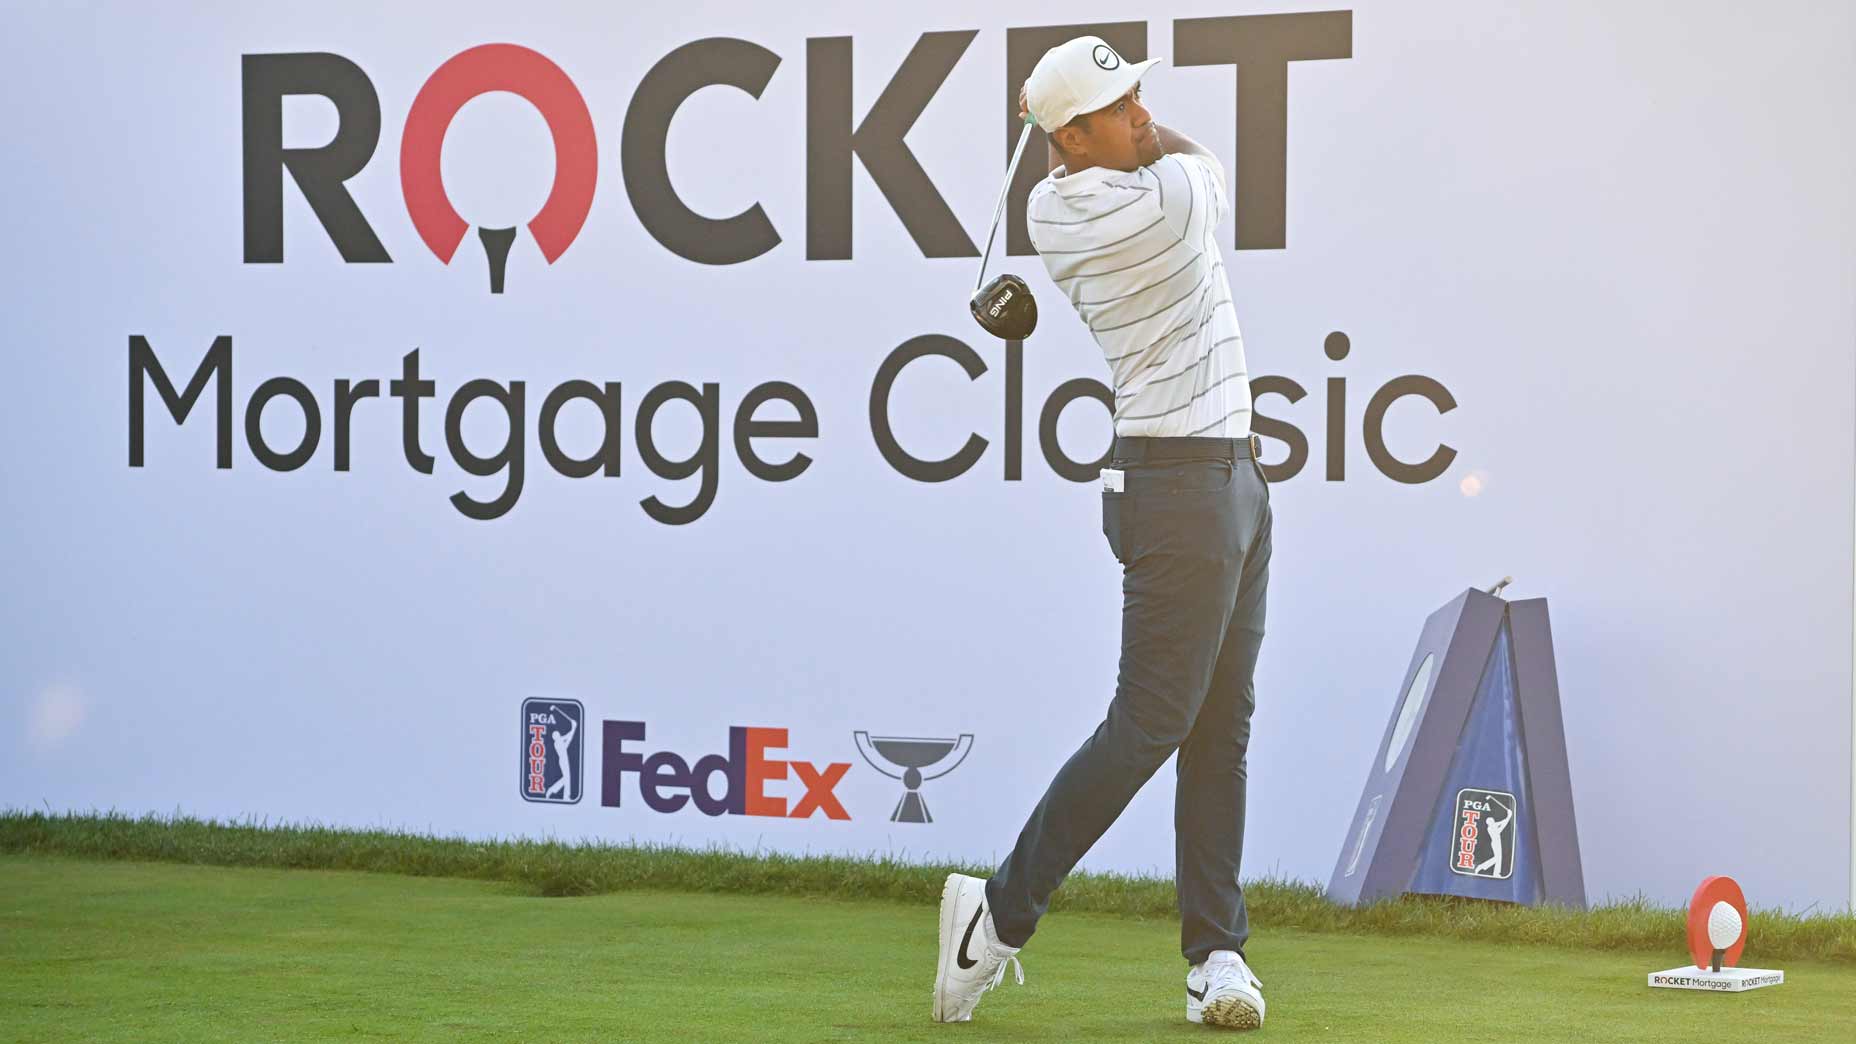 How to watch the 2022 Rocket Mortgage Classic on Friday Round 2 live